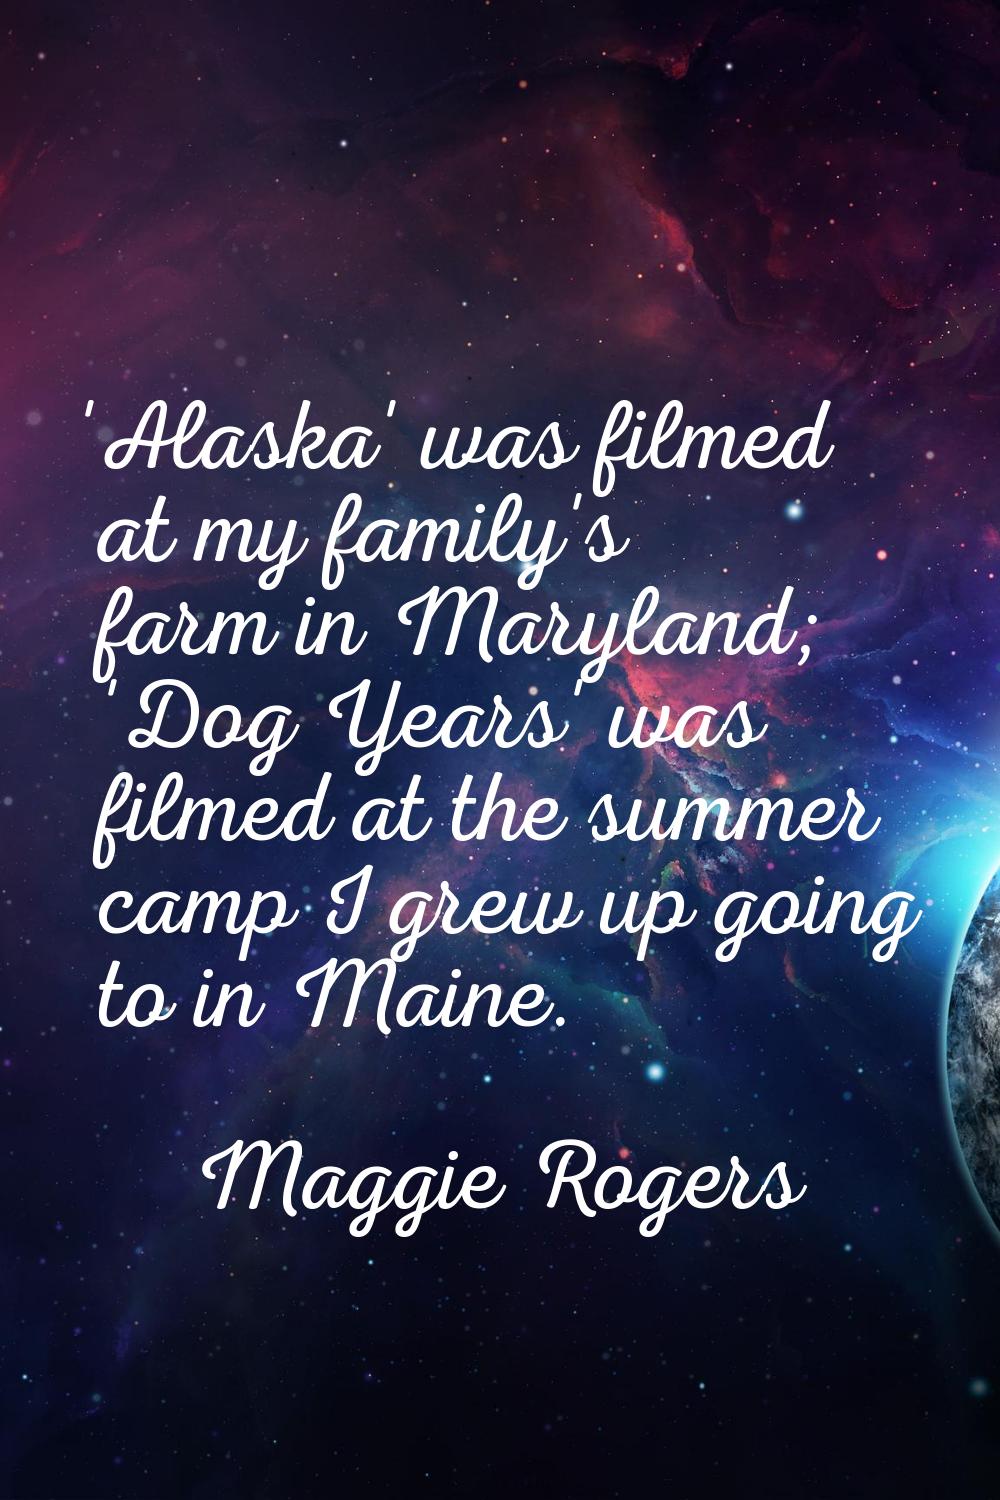 'Alaska' was filmed at my family's farm in Maryland; 'Dog Years' was filmed at the summer camp I gr